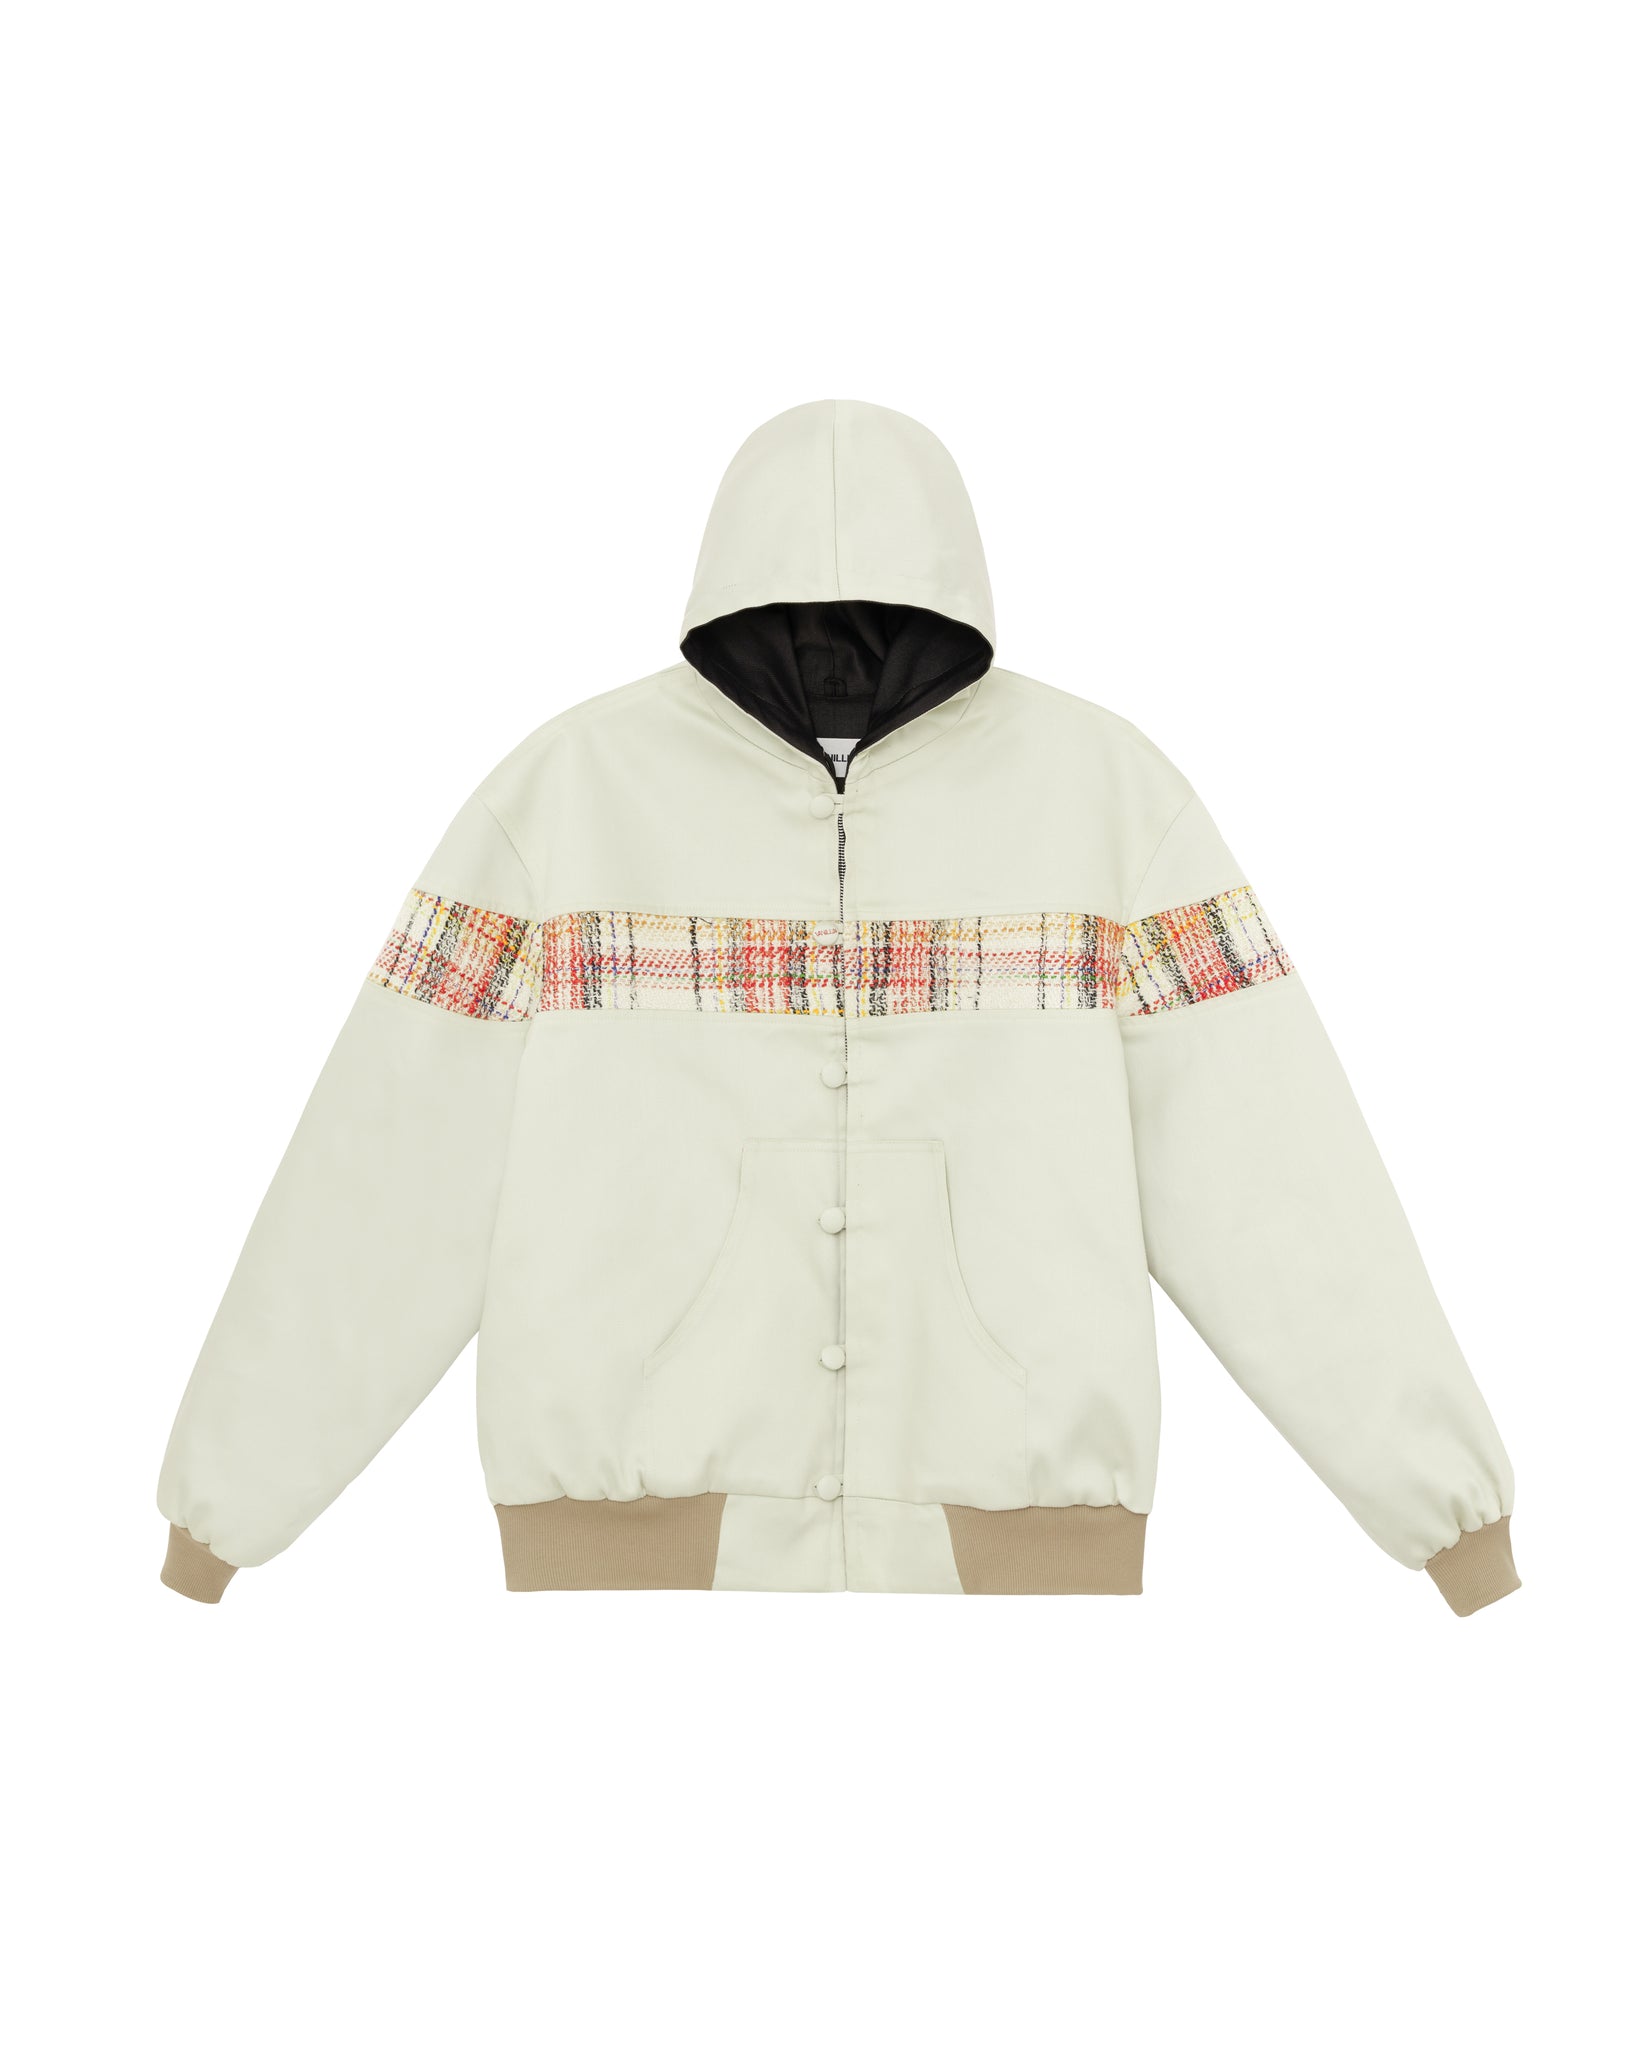 AW21-CLS-32 JACKET